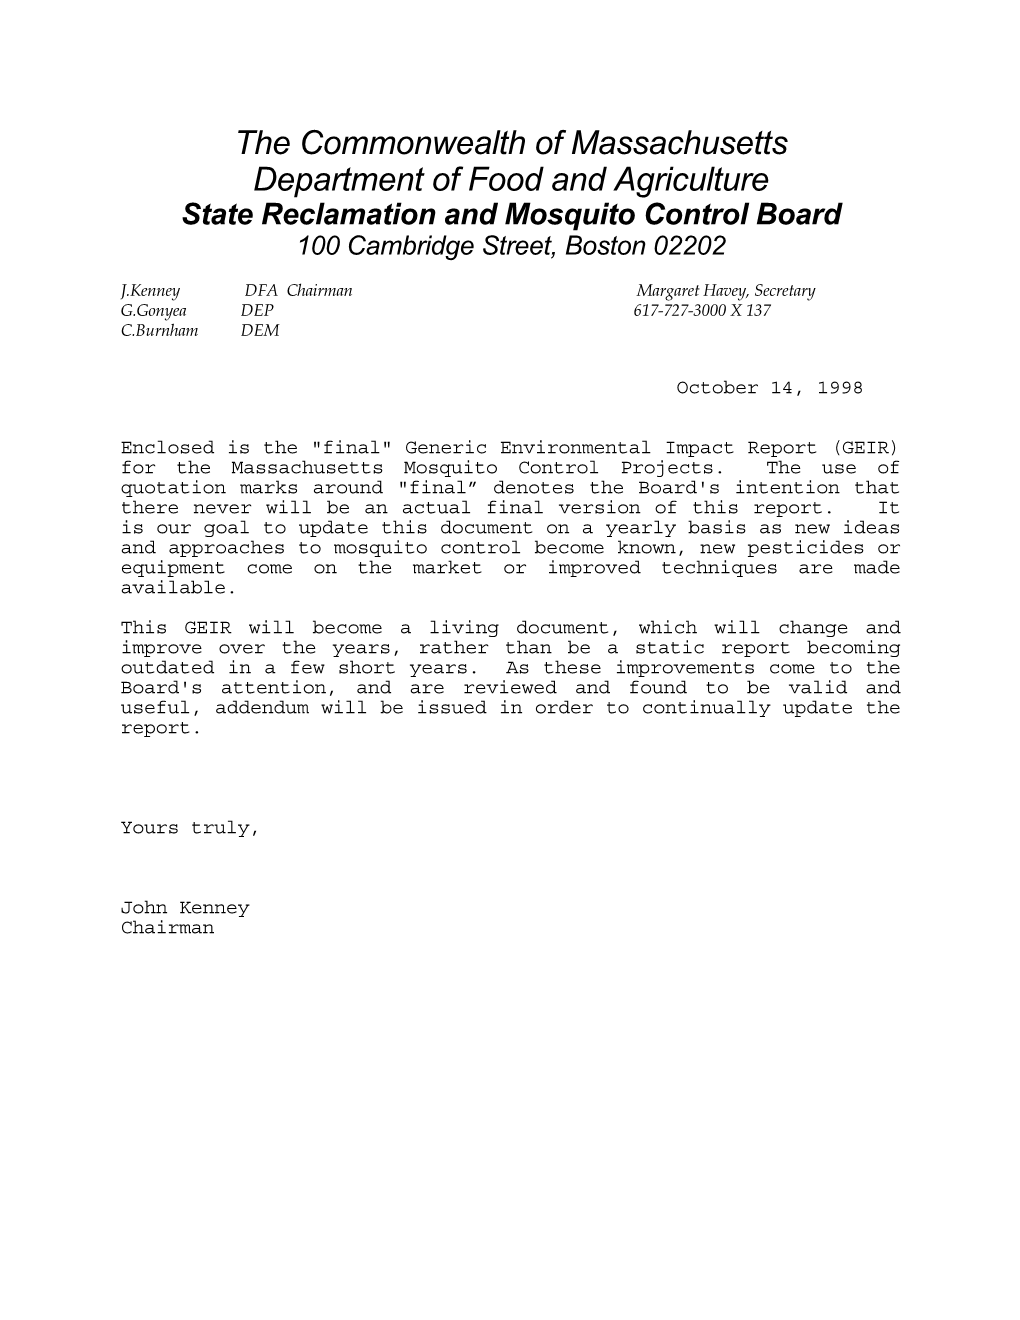 The Commonwealth of Massachusetts Department of Food and Agriculture State Reclamation and Mosquito Control Board 100 Cambridge Street, Boston 02202